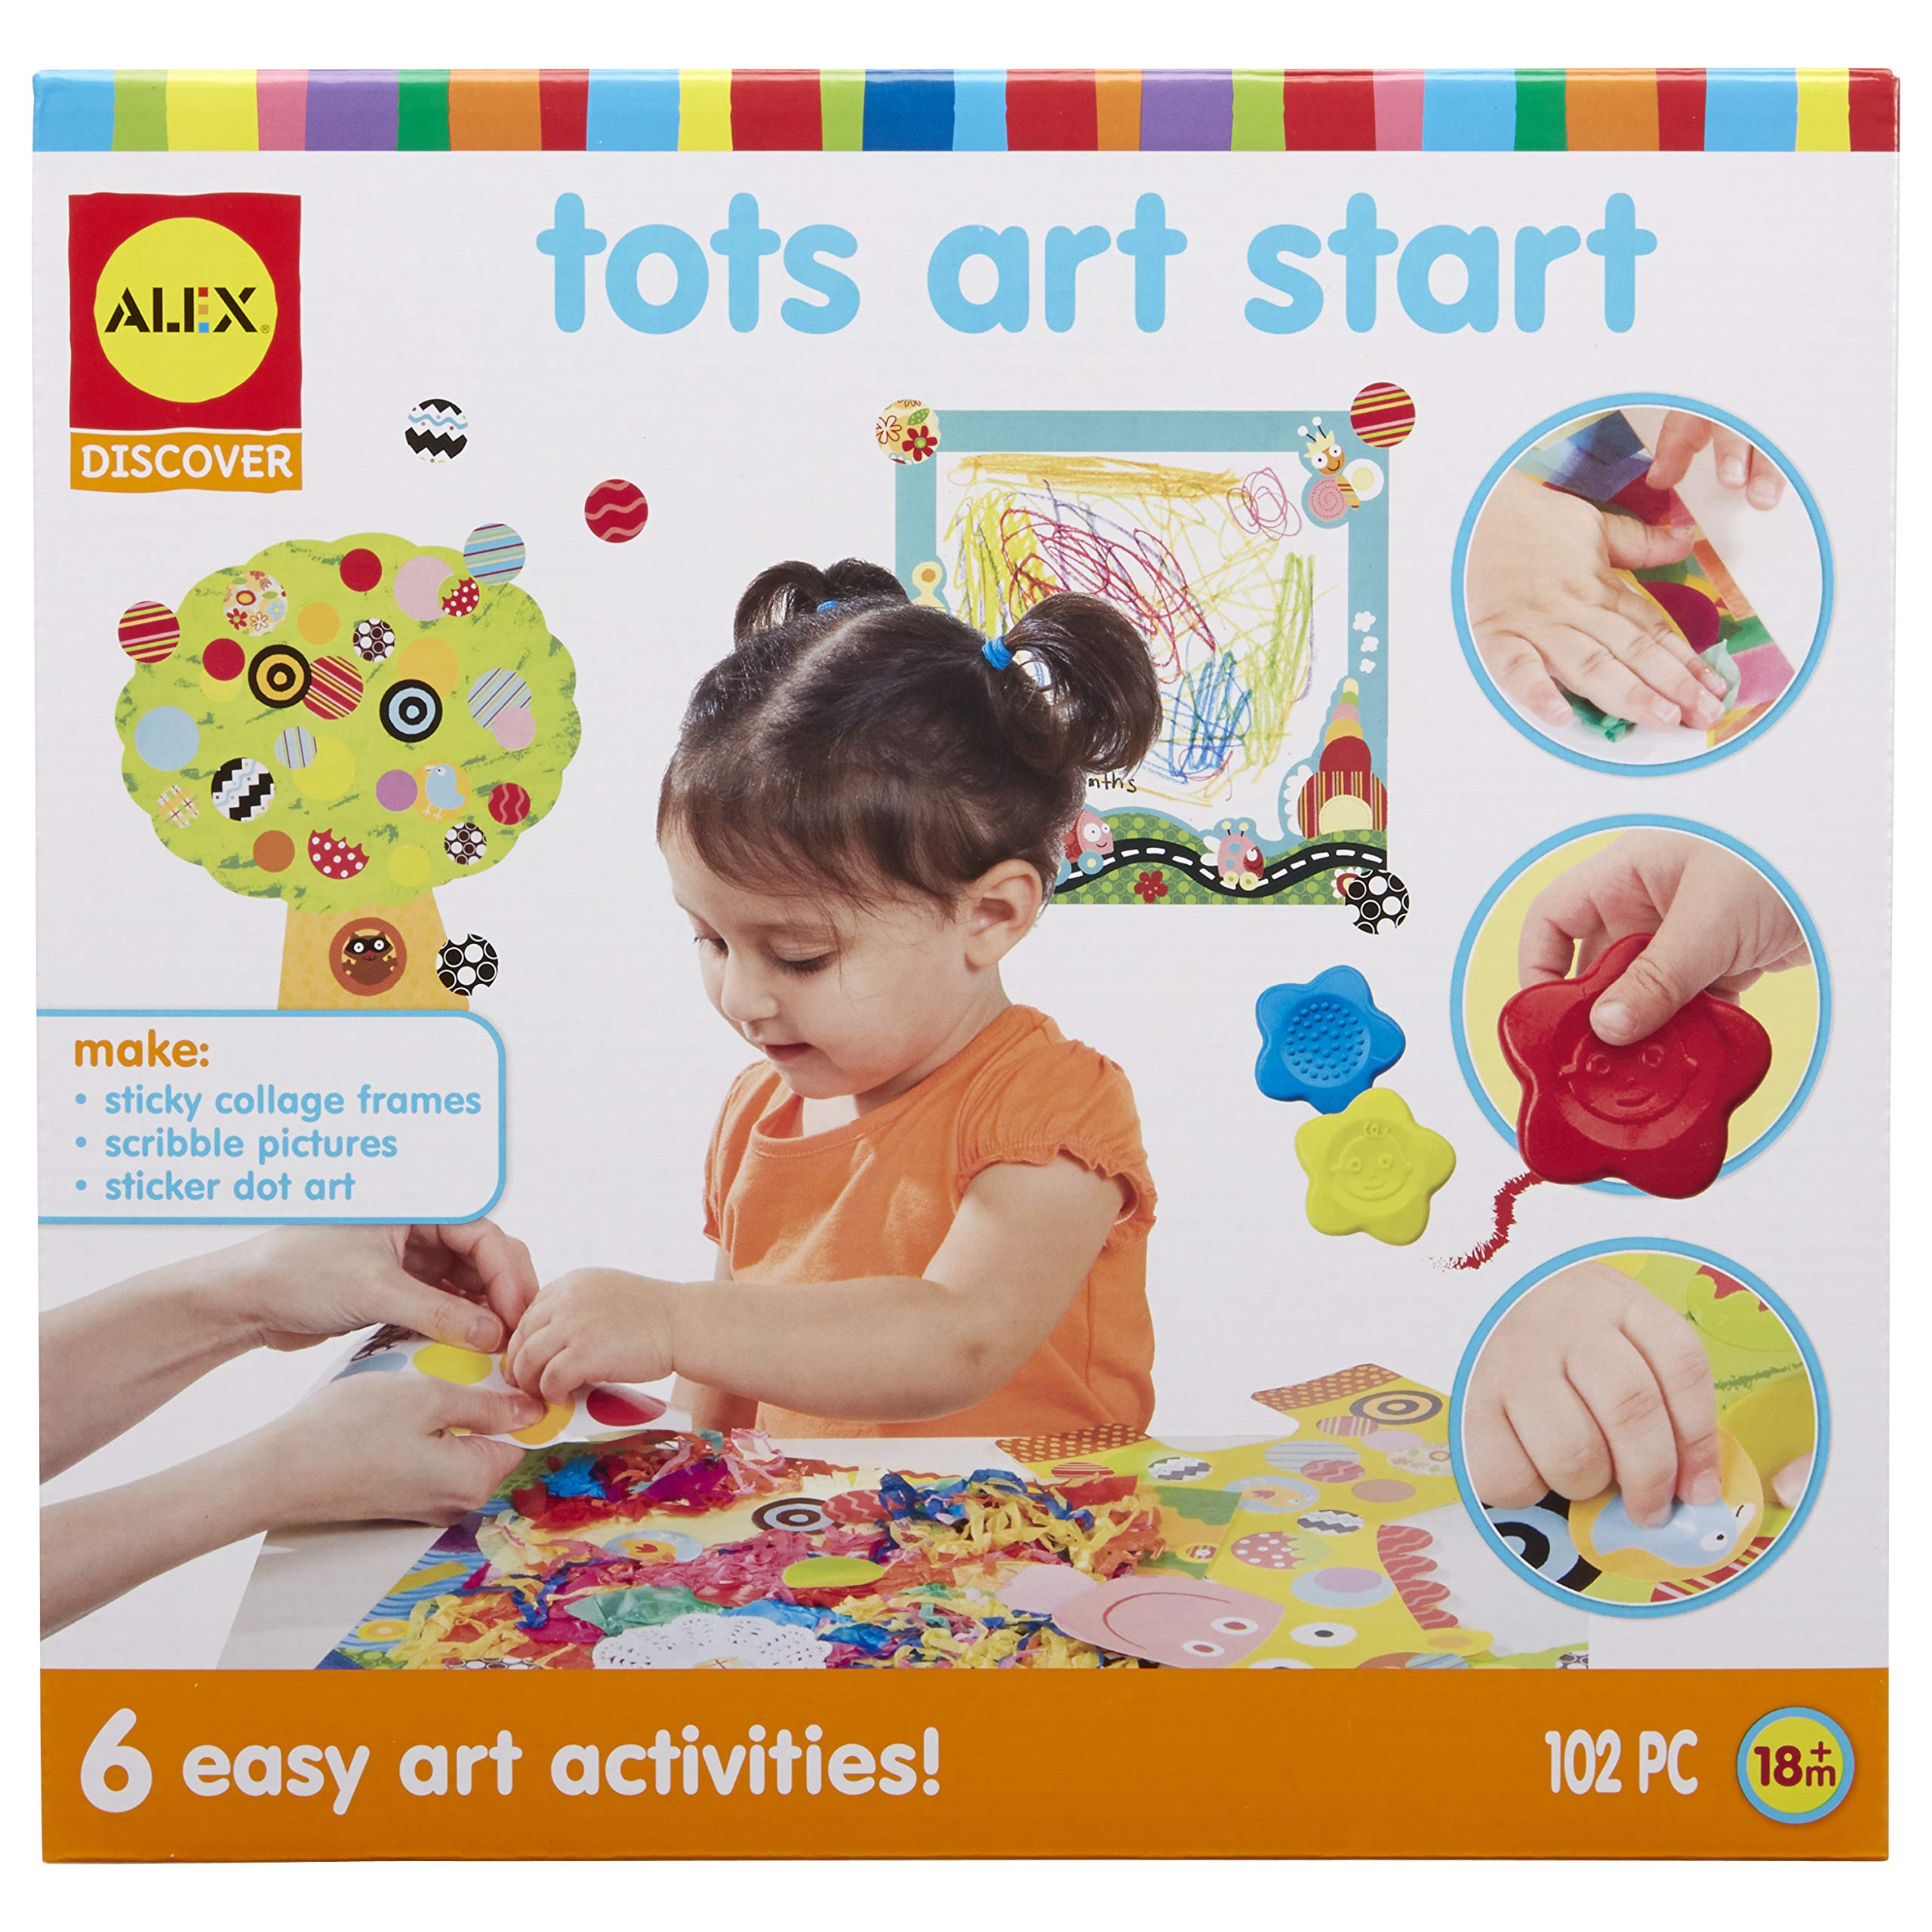 Book Cover Alex Discover Tots Art Start Kids Art and Craft Activity, 6 Super Easy and Fun Art Crafts for Children, Kit for Children to be Creative and Use their Imagination, For Ages 2 and up